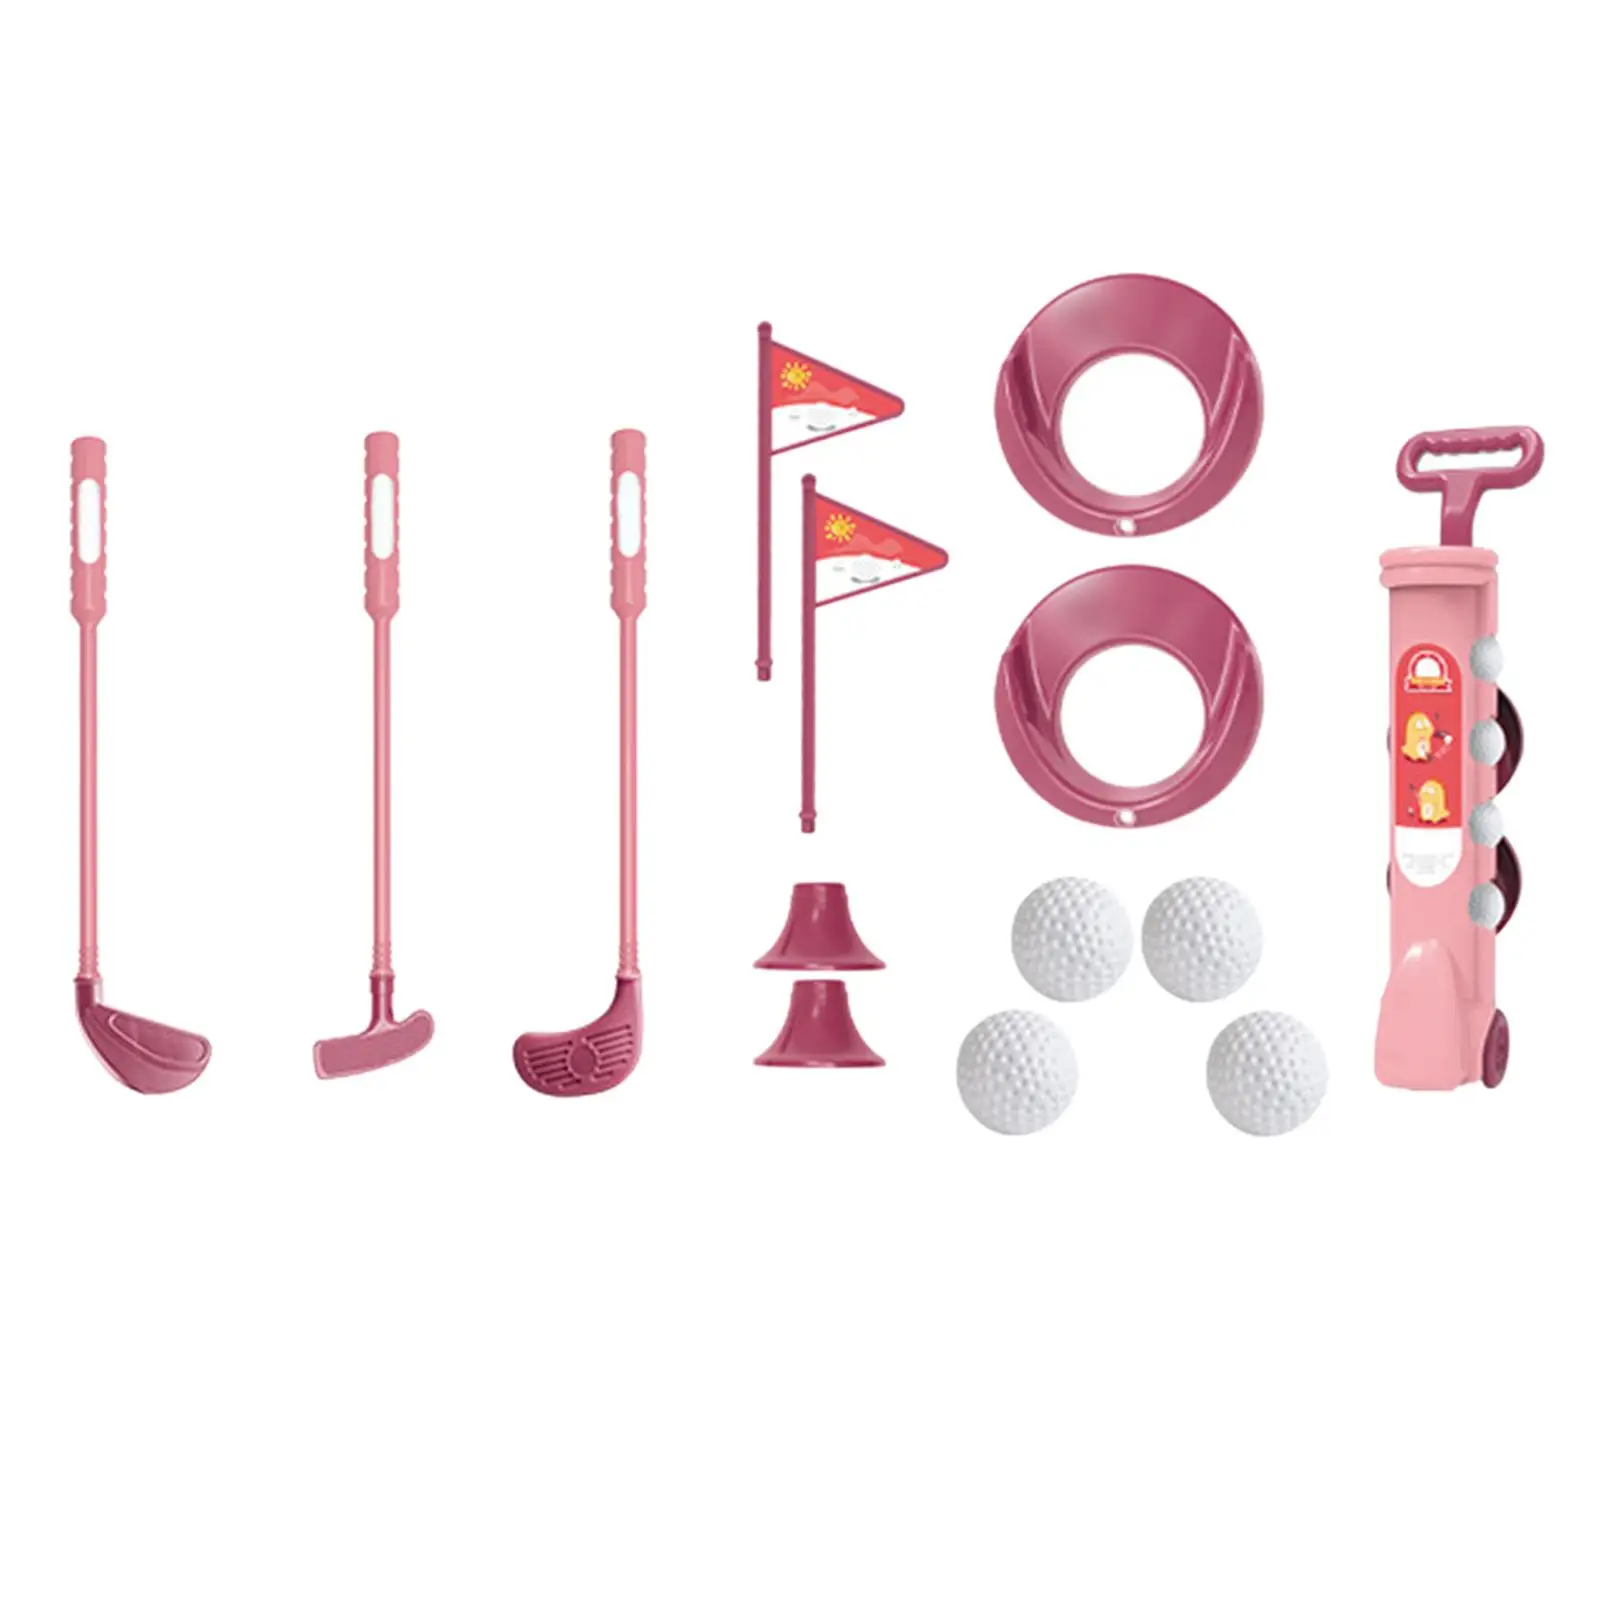 Practicing Kid Golf Practice Game Play Set Outdoors Exercise Toys Funny golf club Set for Indoor Outdoor Lawn Birthday Gift